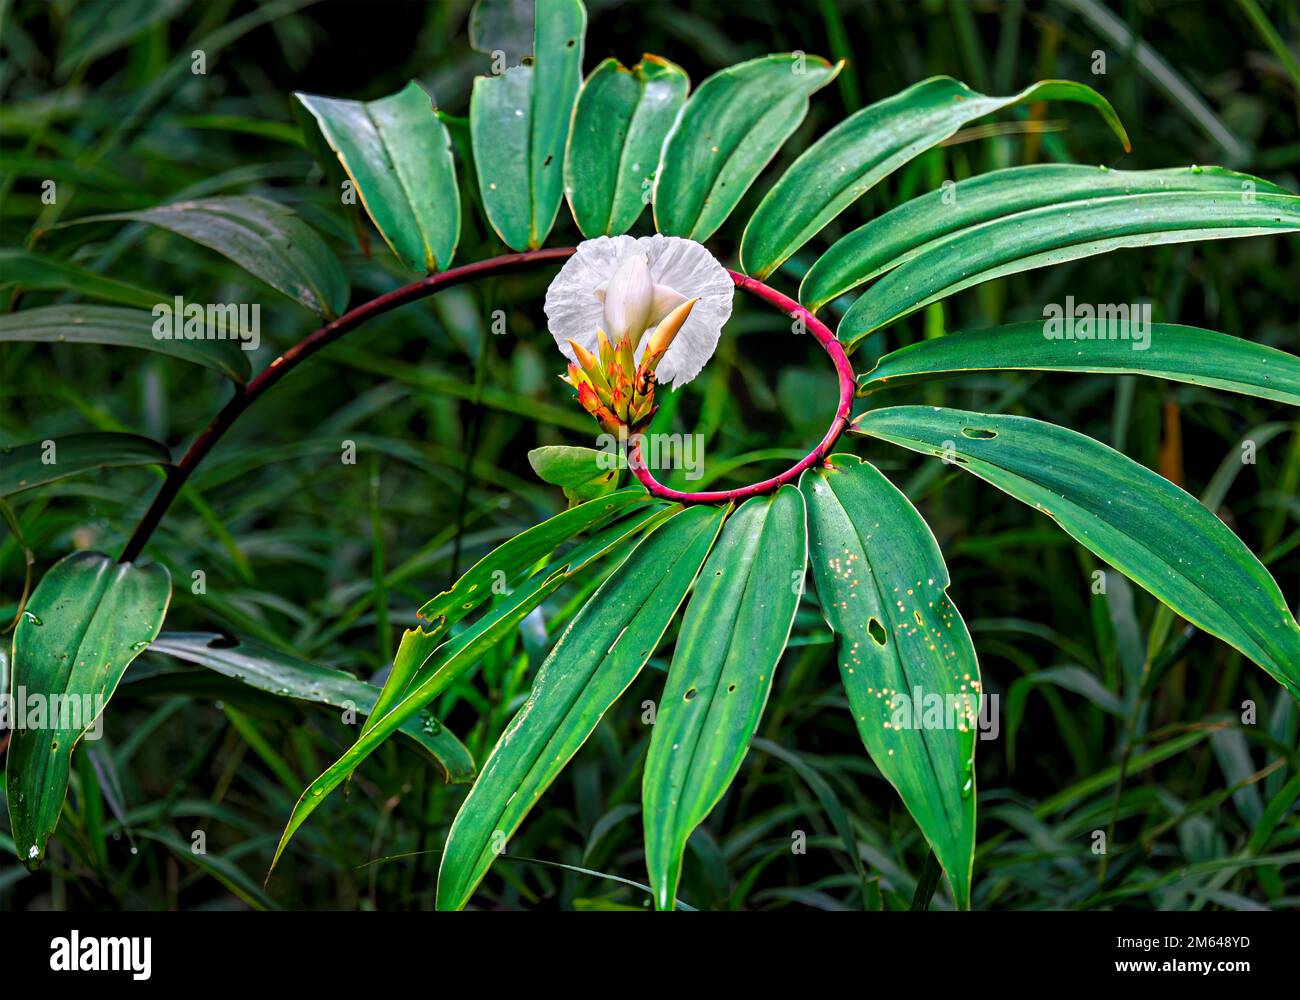 Beautiful blooming wild spiral ginger crepe flower with handkerchief-like petal. Stock Photo